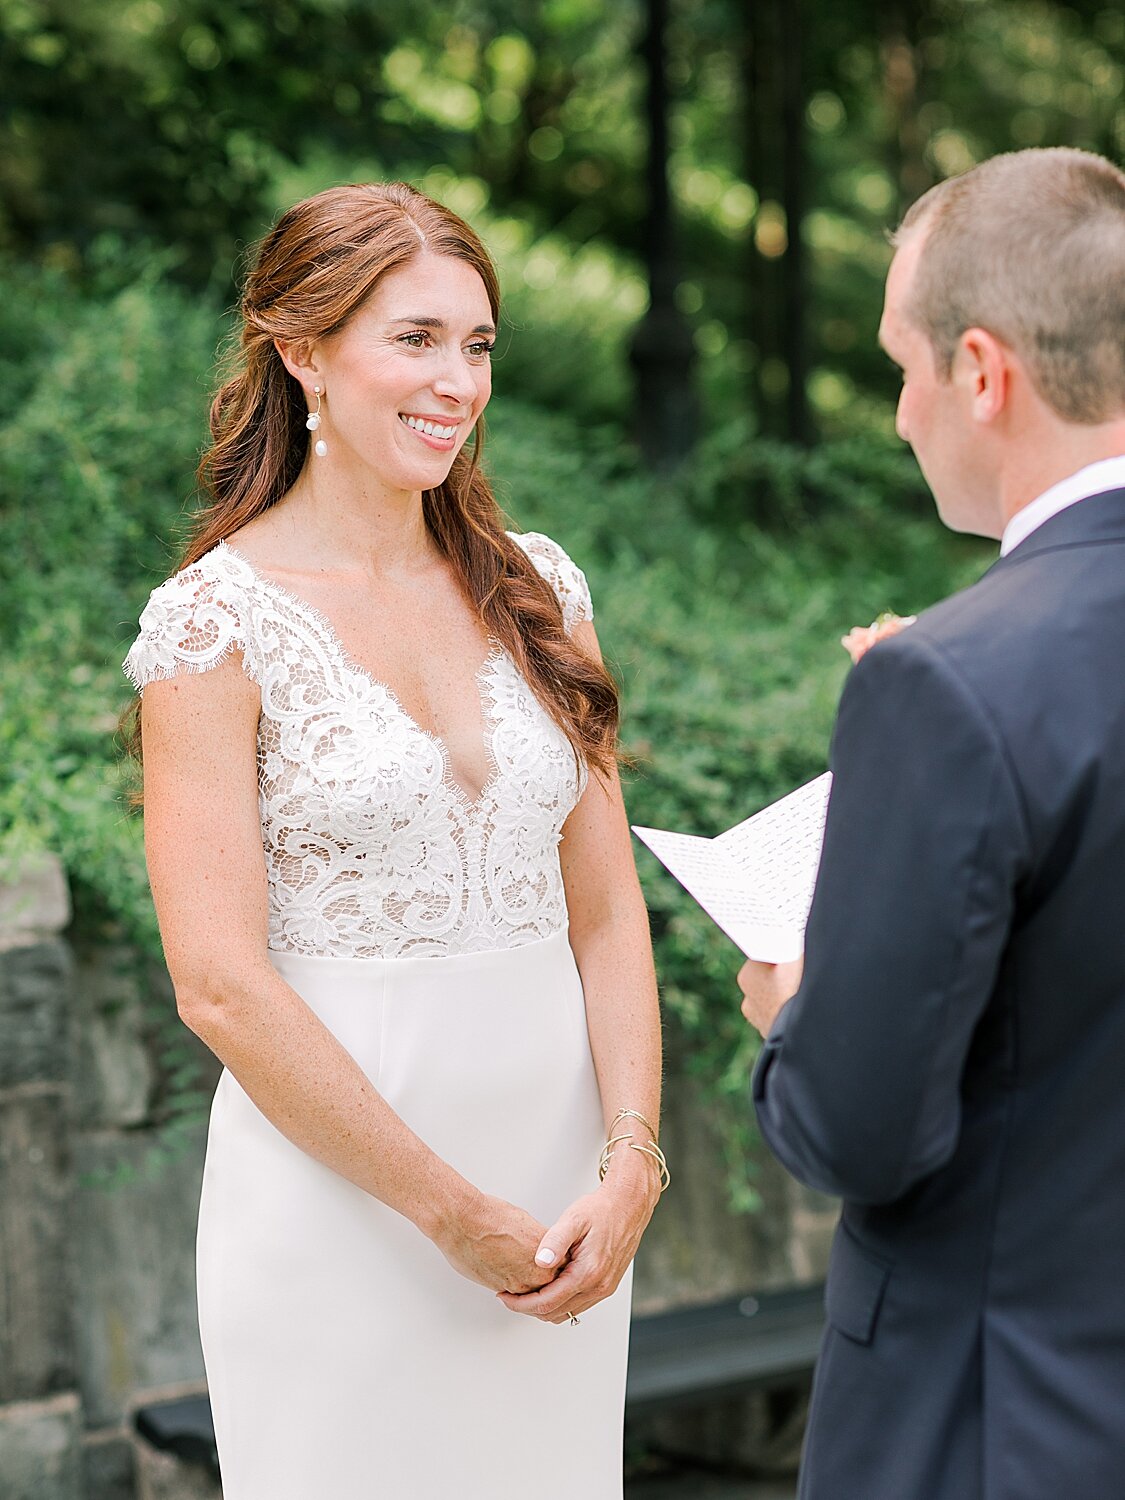 bride listens while groom reads vows | Asher Gardner Photography | Elopement at the Central Park Conservatory Gardens